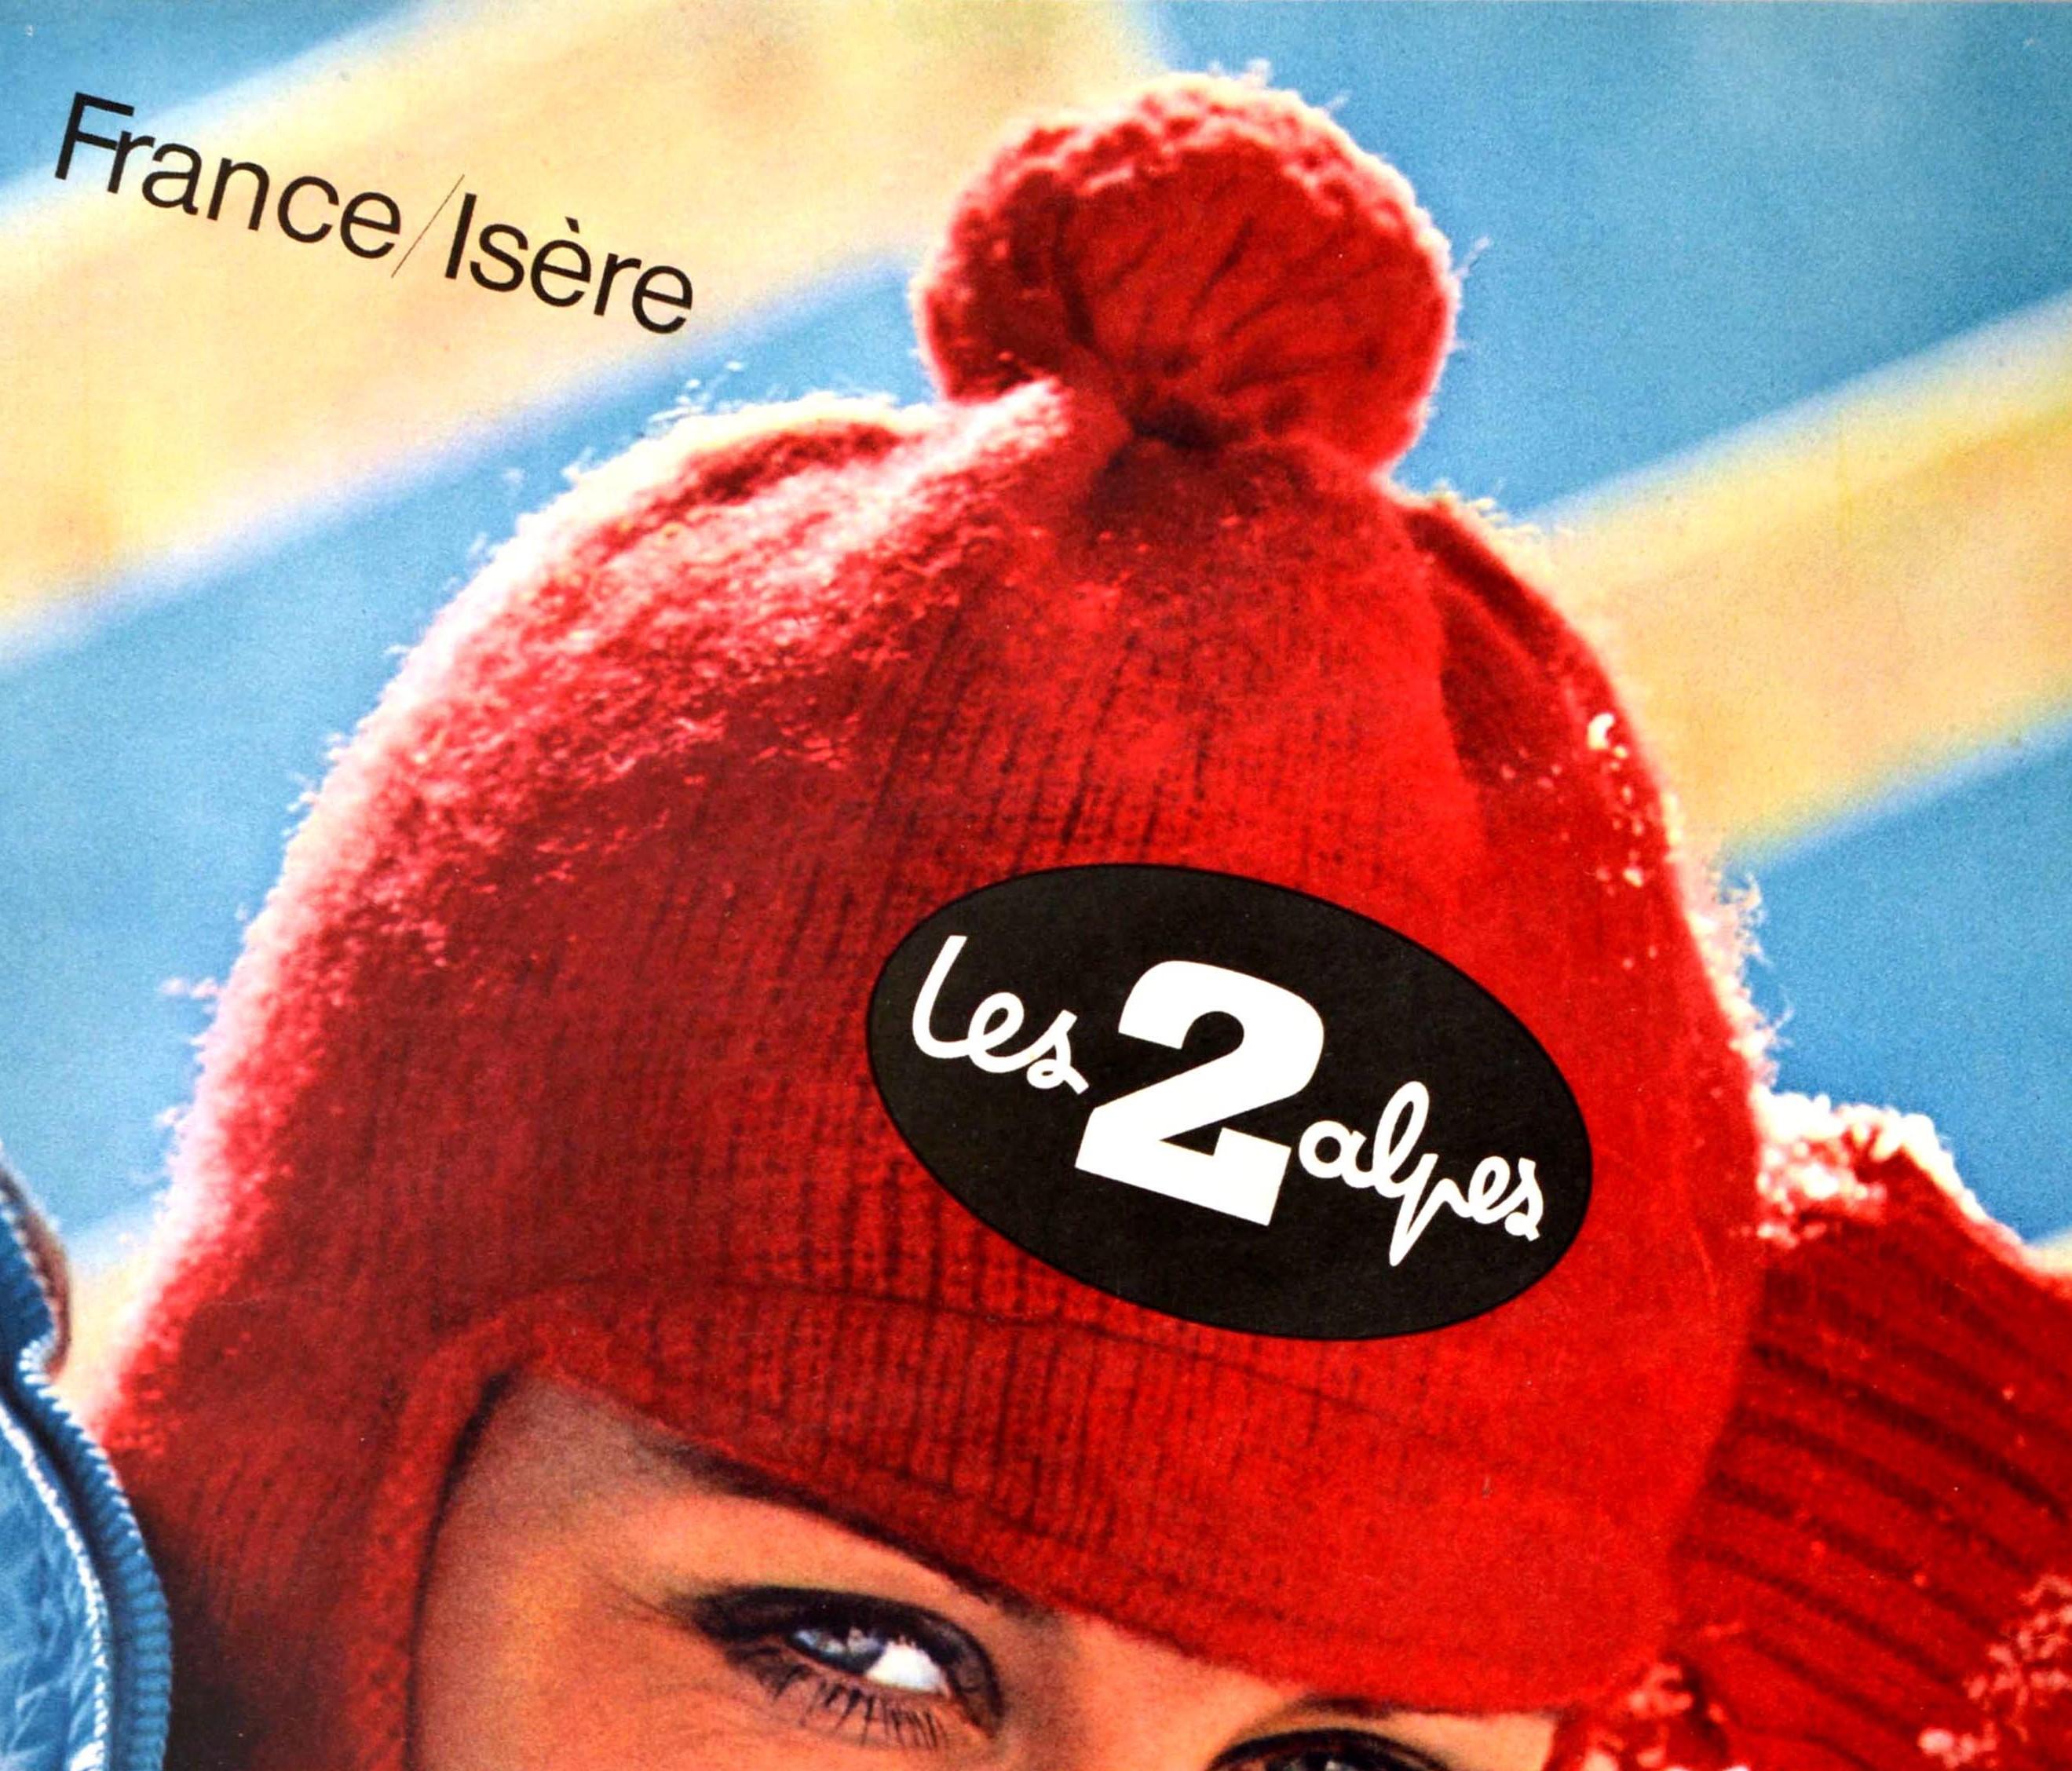 Original vintage winter sport travel poster for France Isere Les 2 Alpes ski resort featuring a great photograph of a lady wearing red wool balaclava hat and gloves and a blue ski jacket resting on the snow and smiling to the viewer. The popular